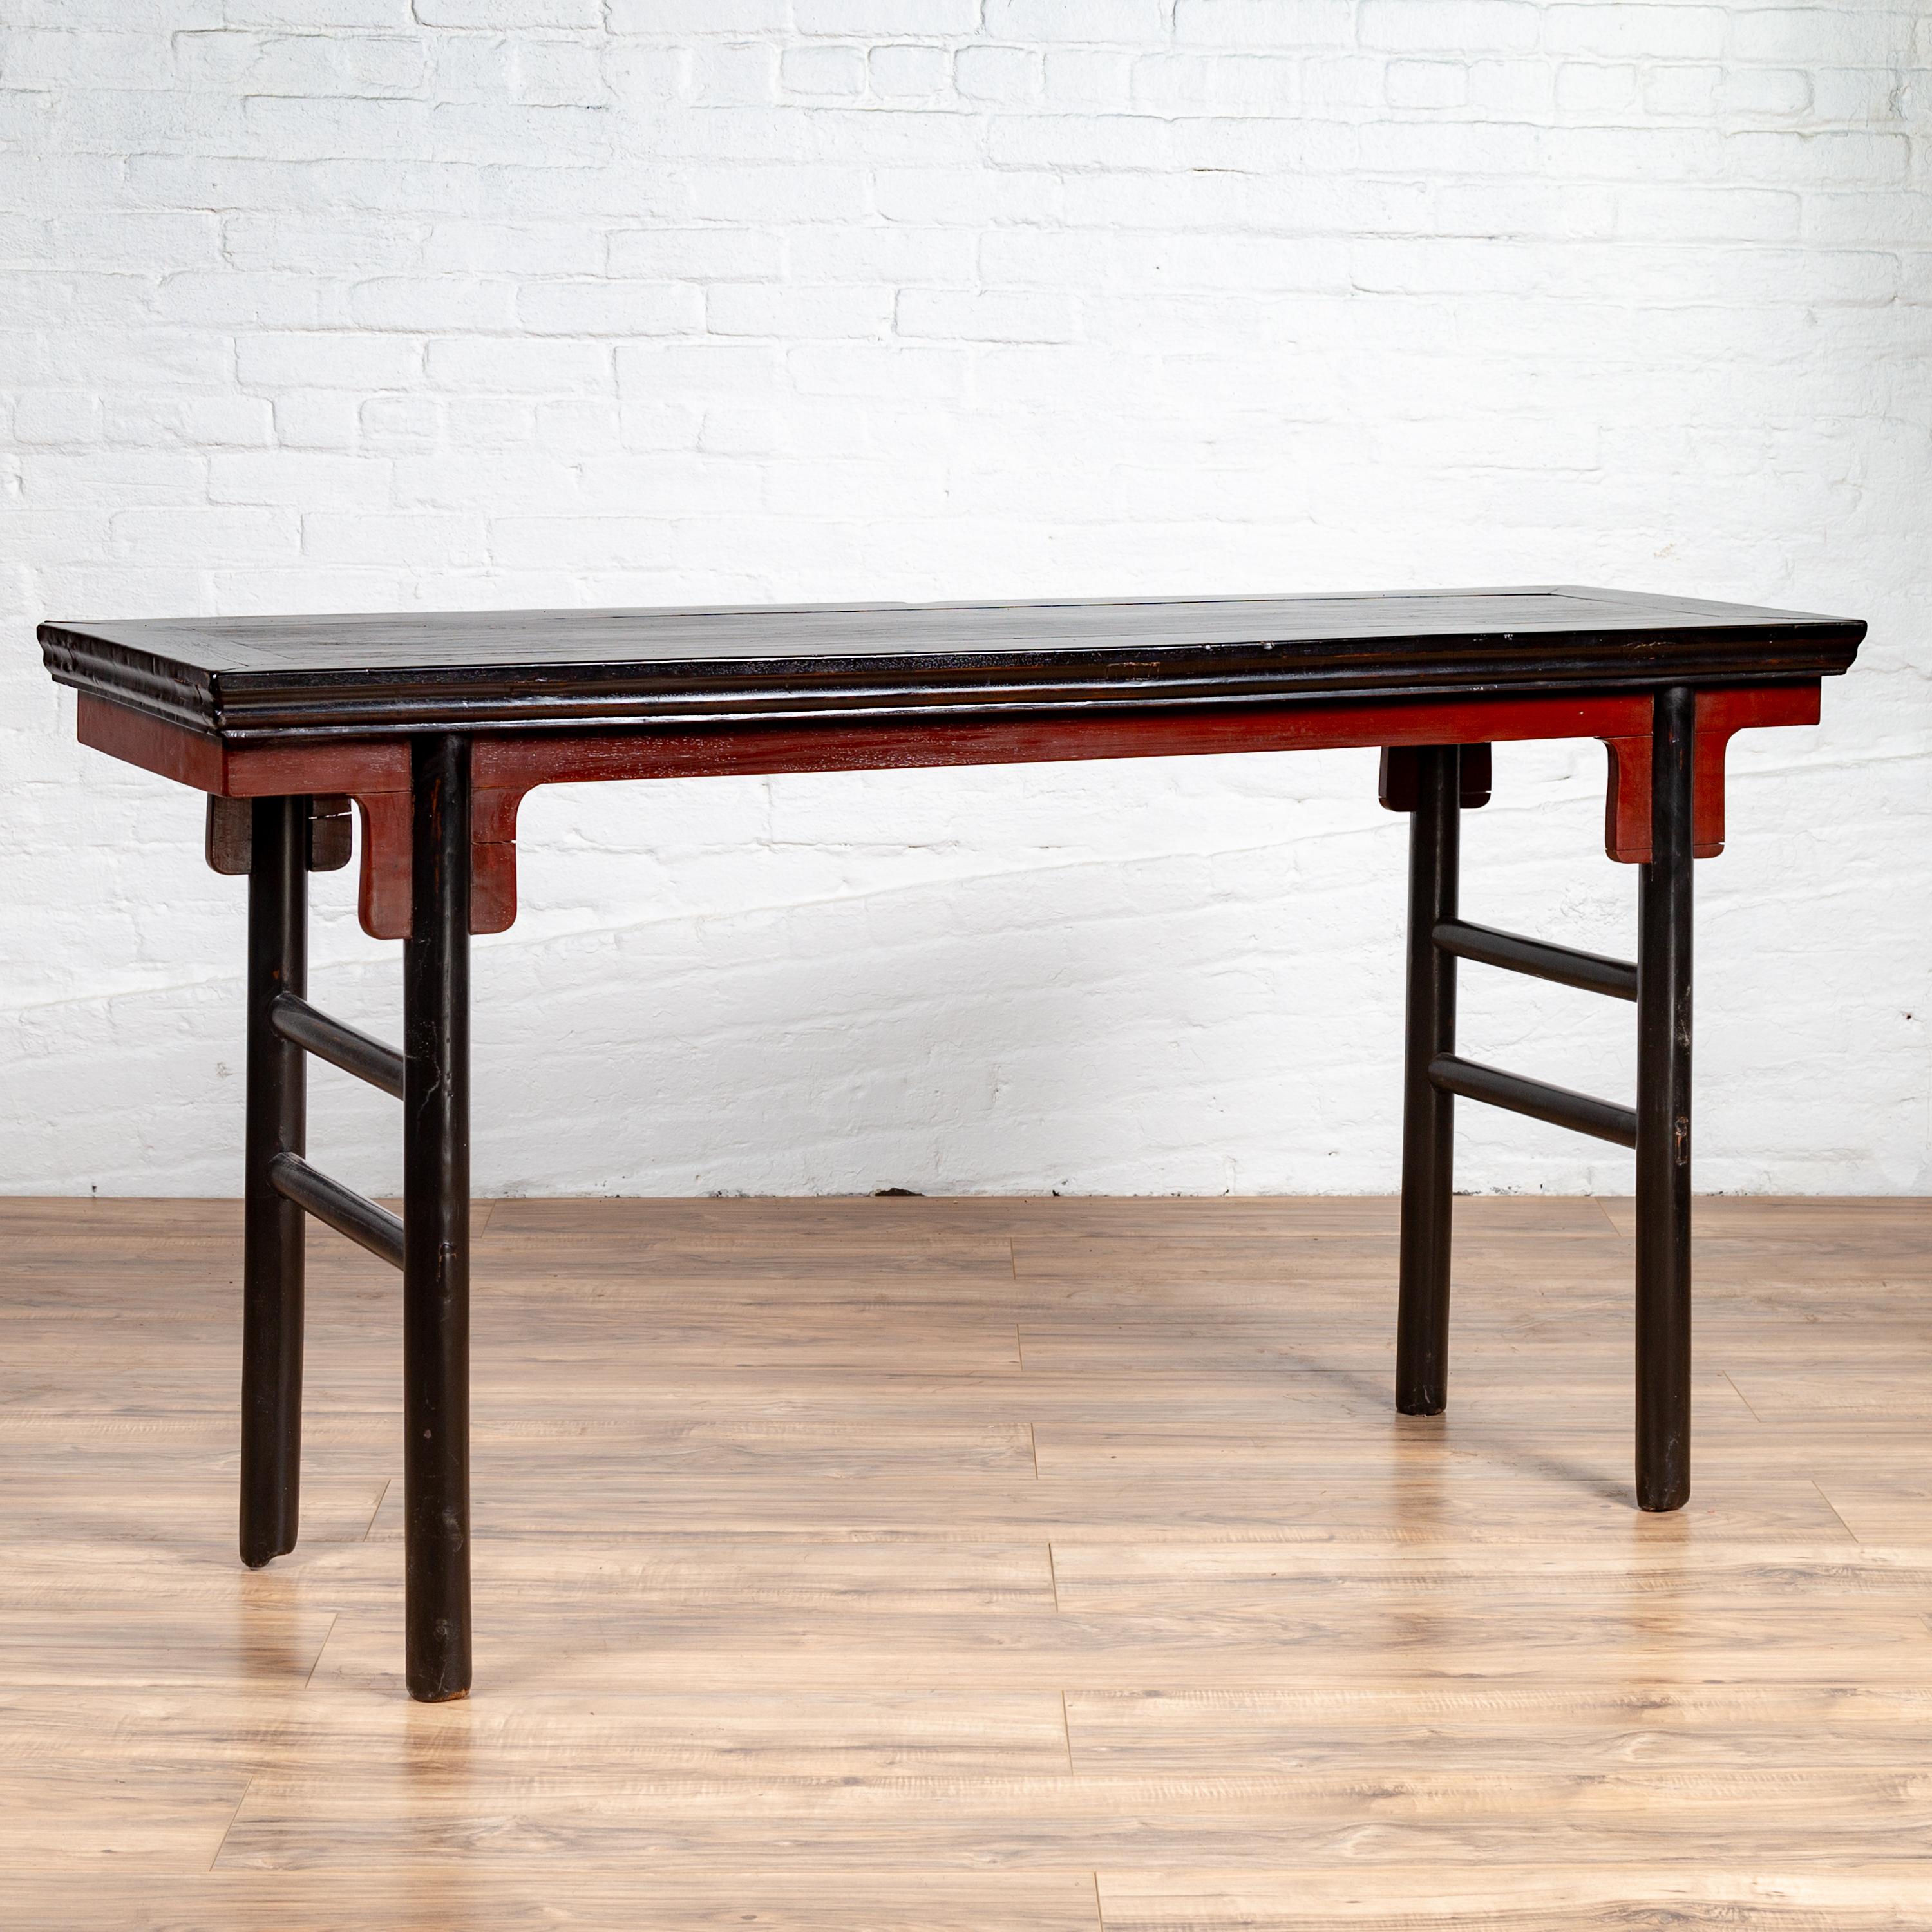 20th Century Chinese Ming Dynasty Style Black Lacquered Altar Console Table with Red Apron